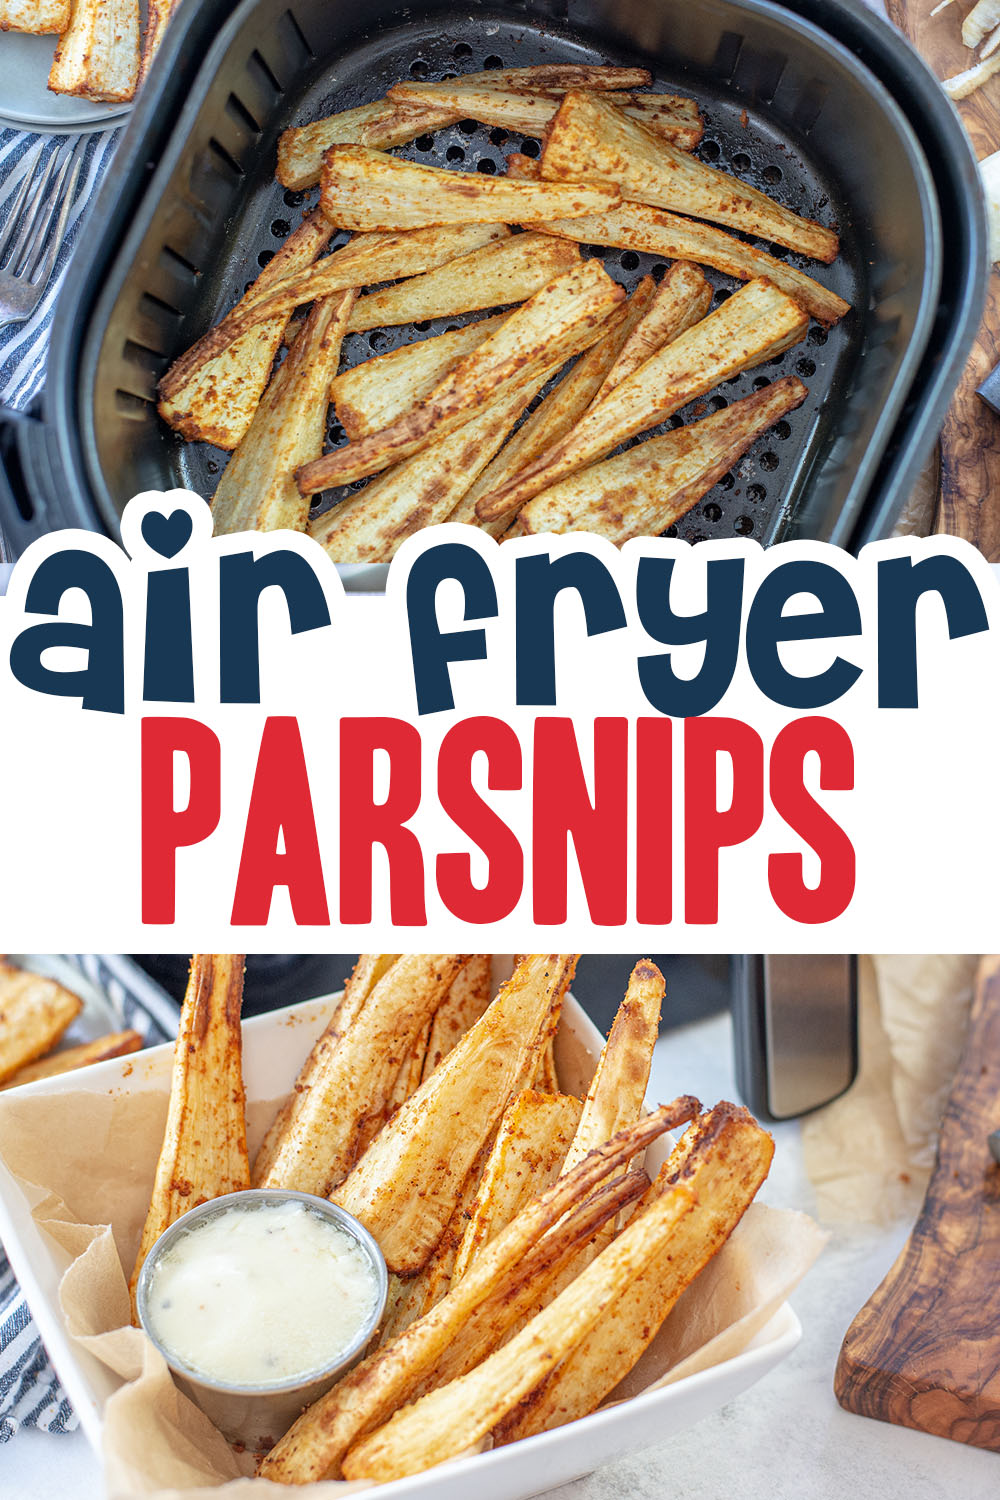 These parsnips are flavored with a savory seasoning the pairs great with dips for a healthy side dish!